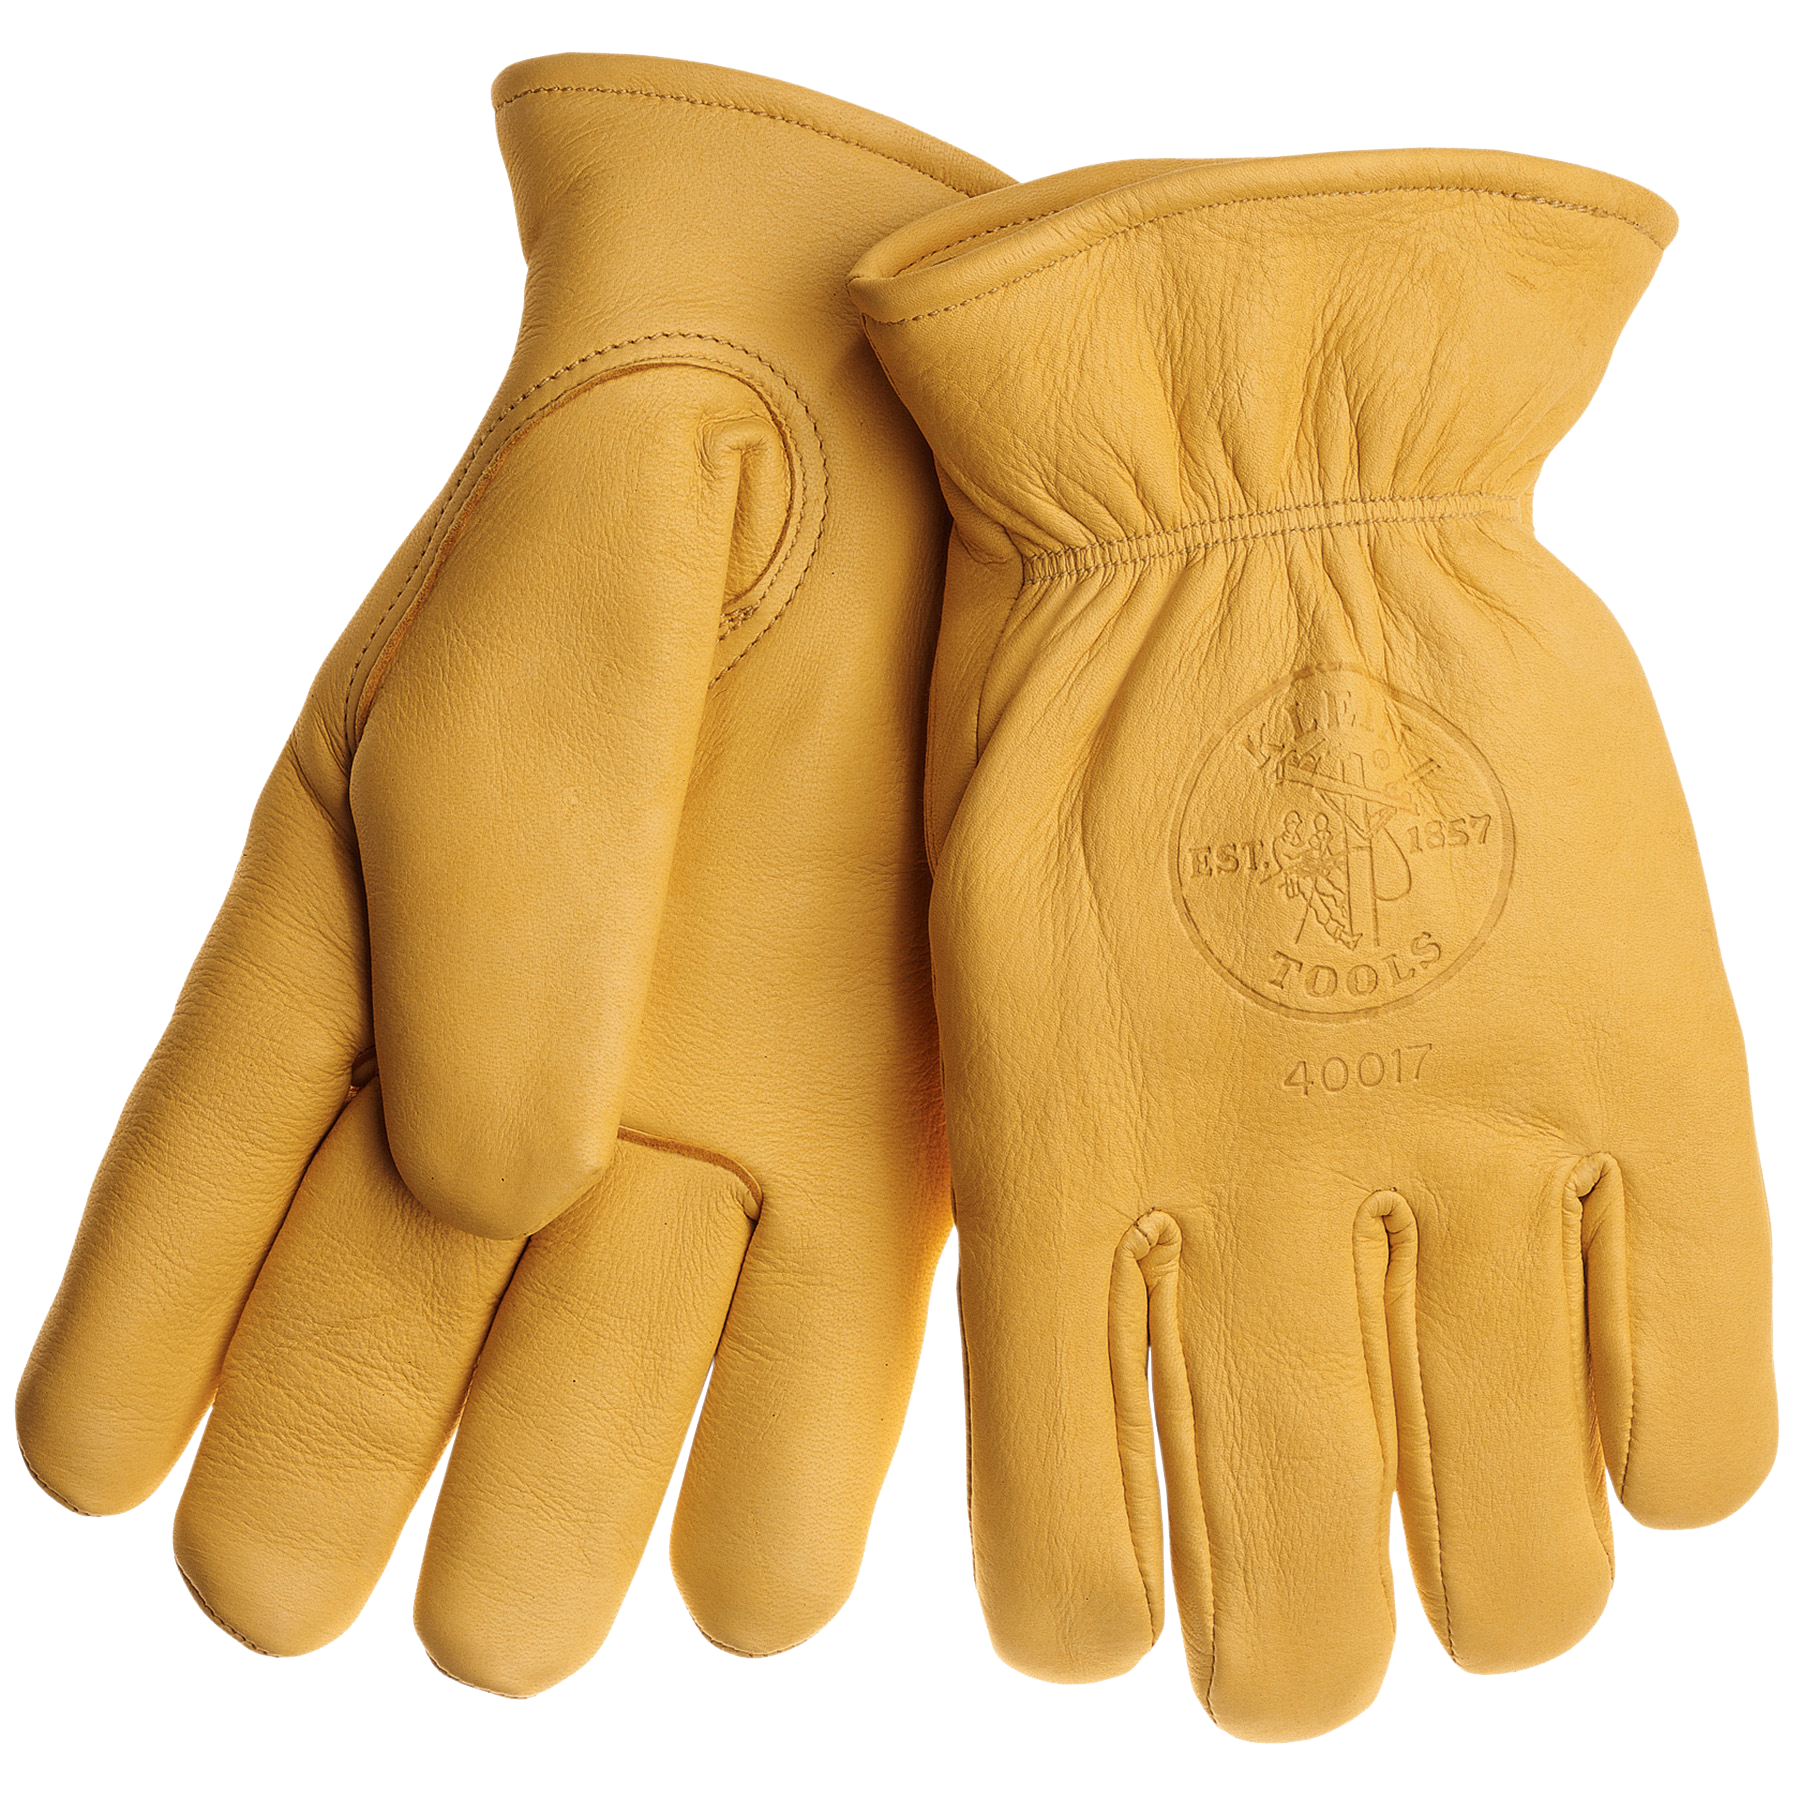 Gloves png transparent images. Mittens clipart hand glove